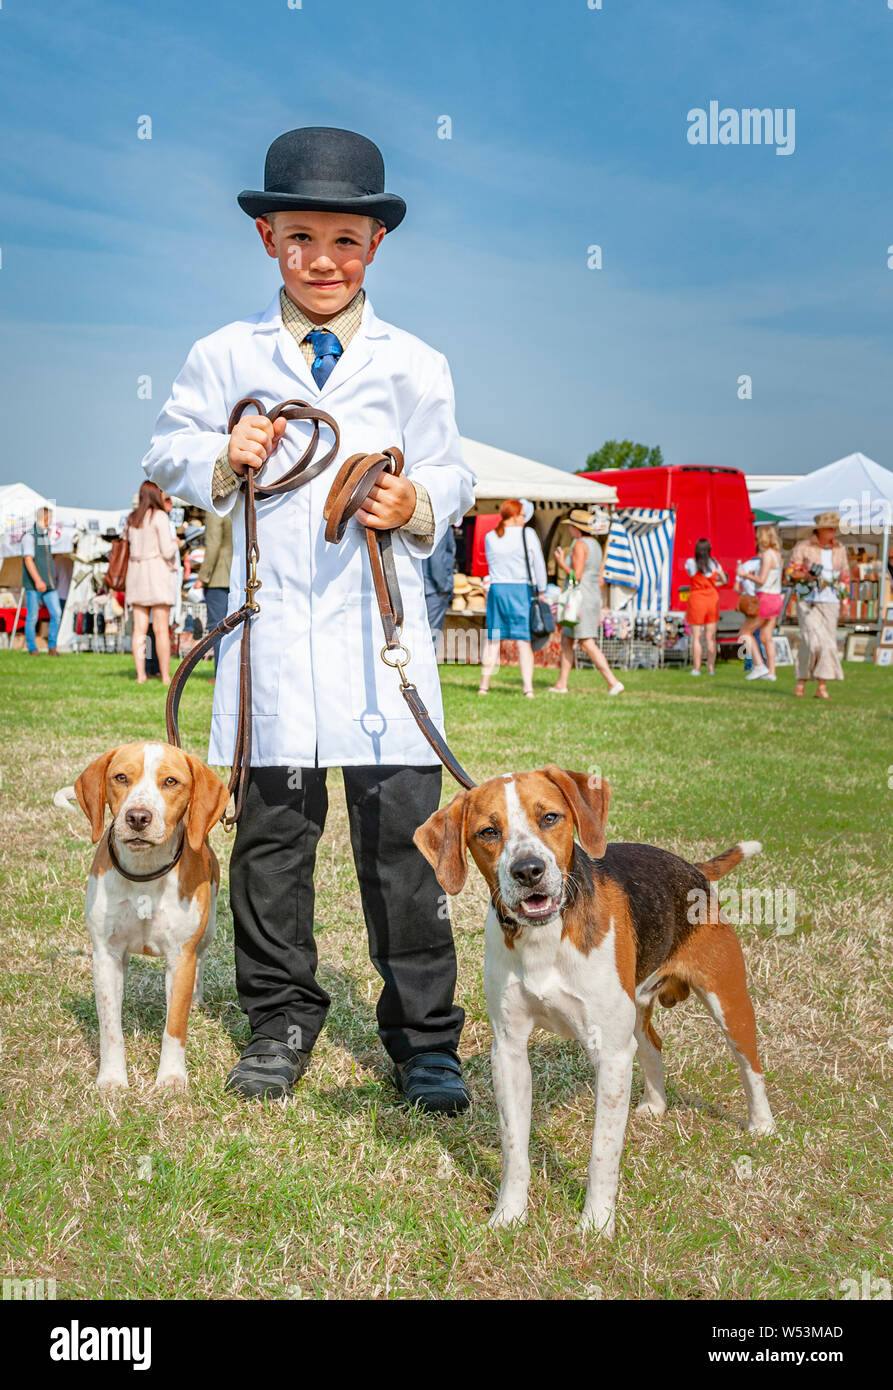 Festival of Hunting, Peterborough.  A young handler with two beagles waiting to go into the show ring Stock Photo